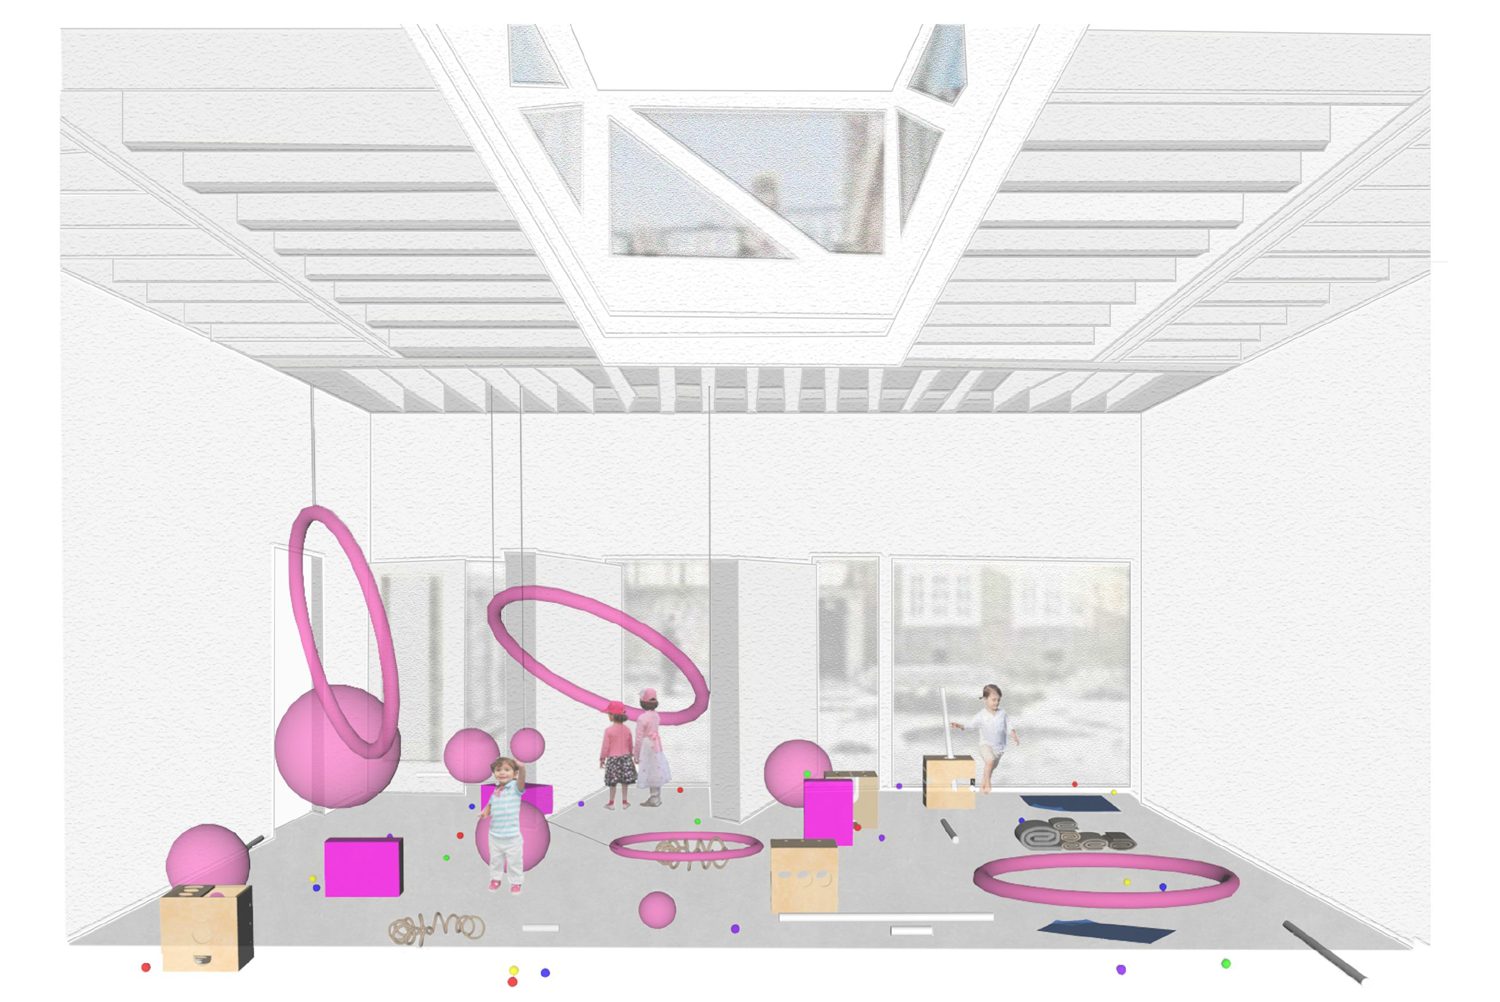 Illustration of the Clore Studio showing suspended hula hoops from the ceiling and balls on the floor to give the impression of a solar system